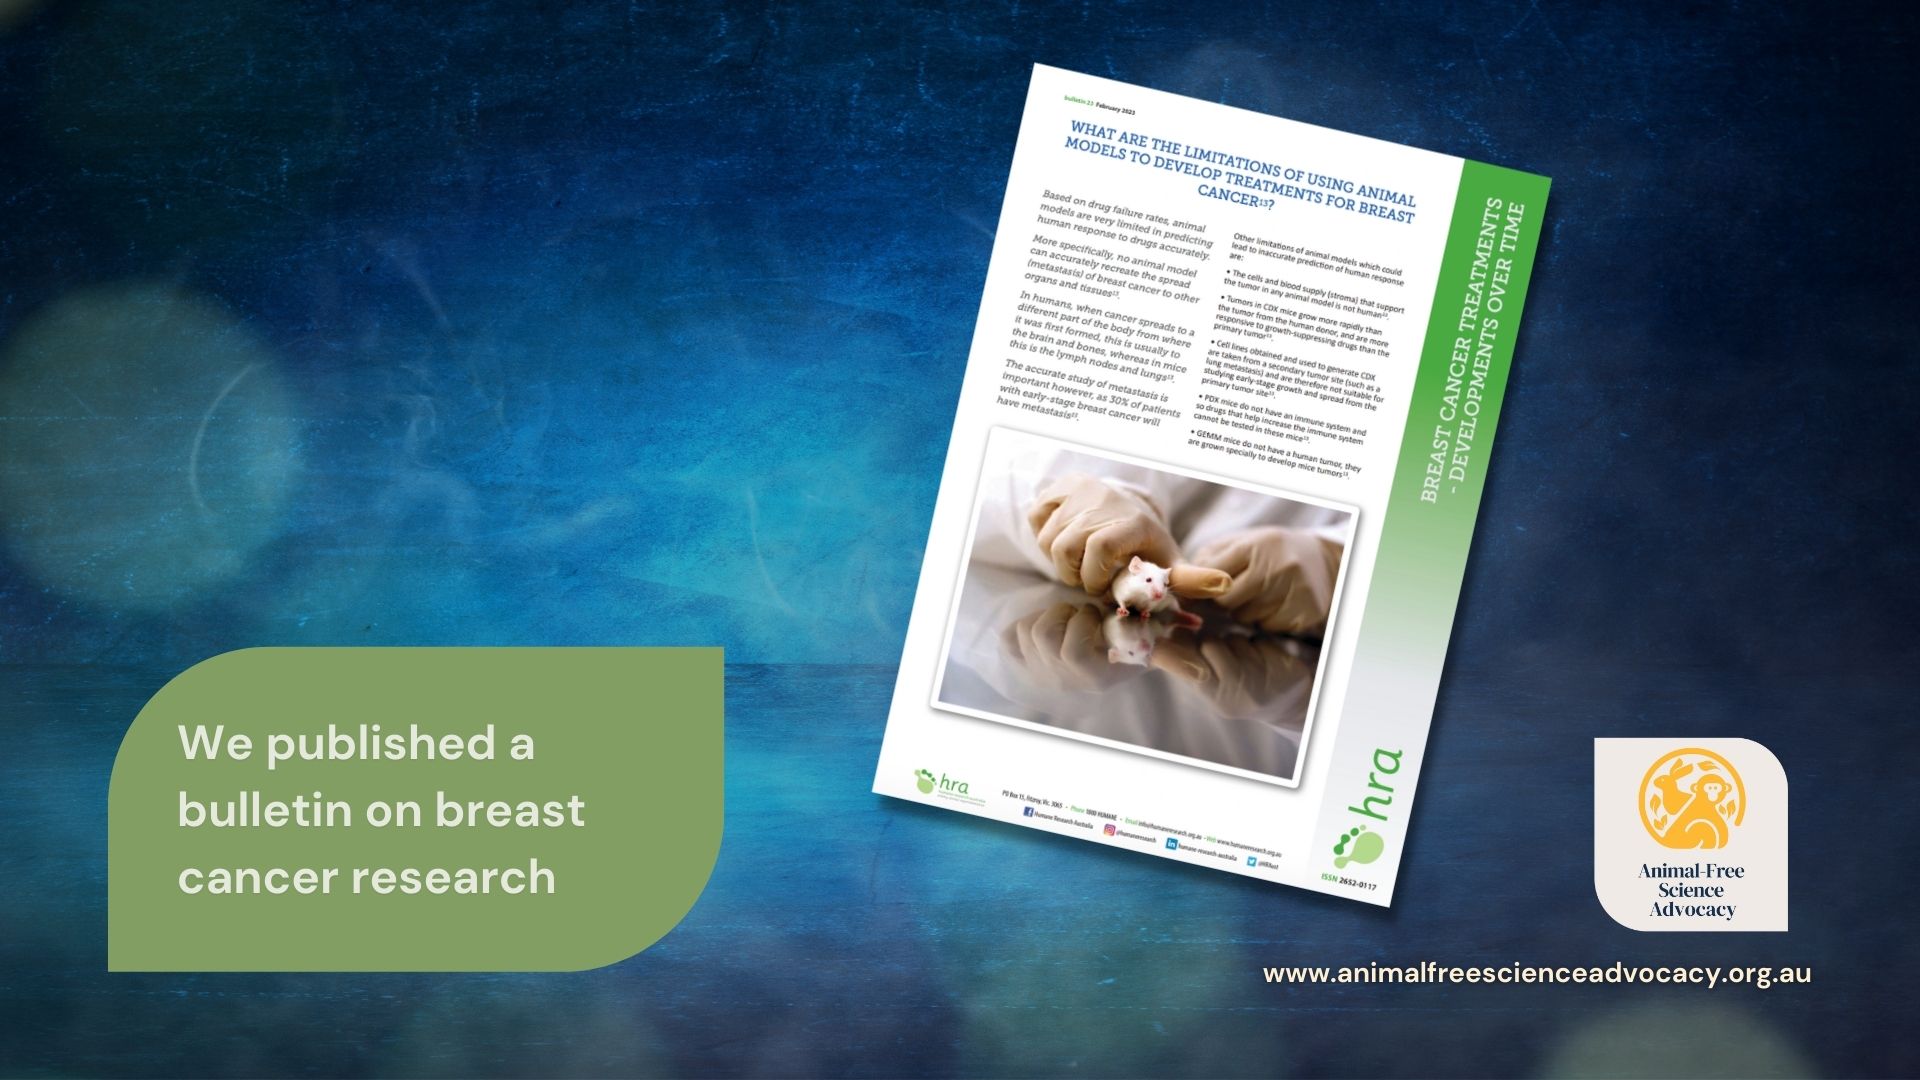 Breast Cancer Bulletin | Animal-Free Science Advocacy Achievements | Animal-Free Science Advocacy